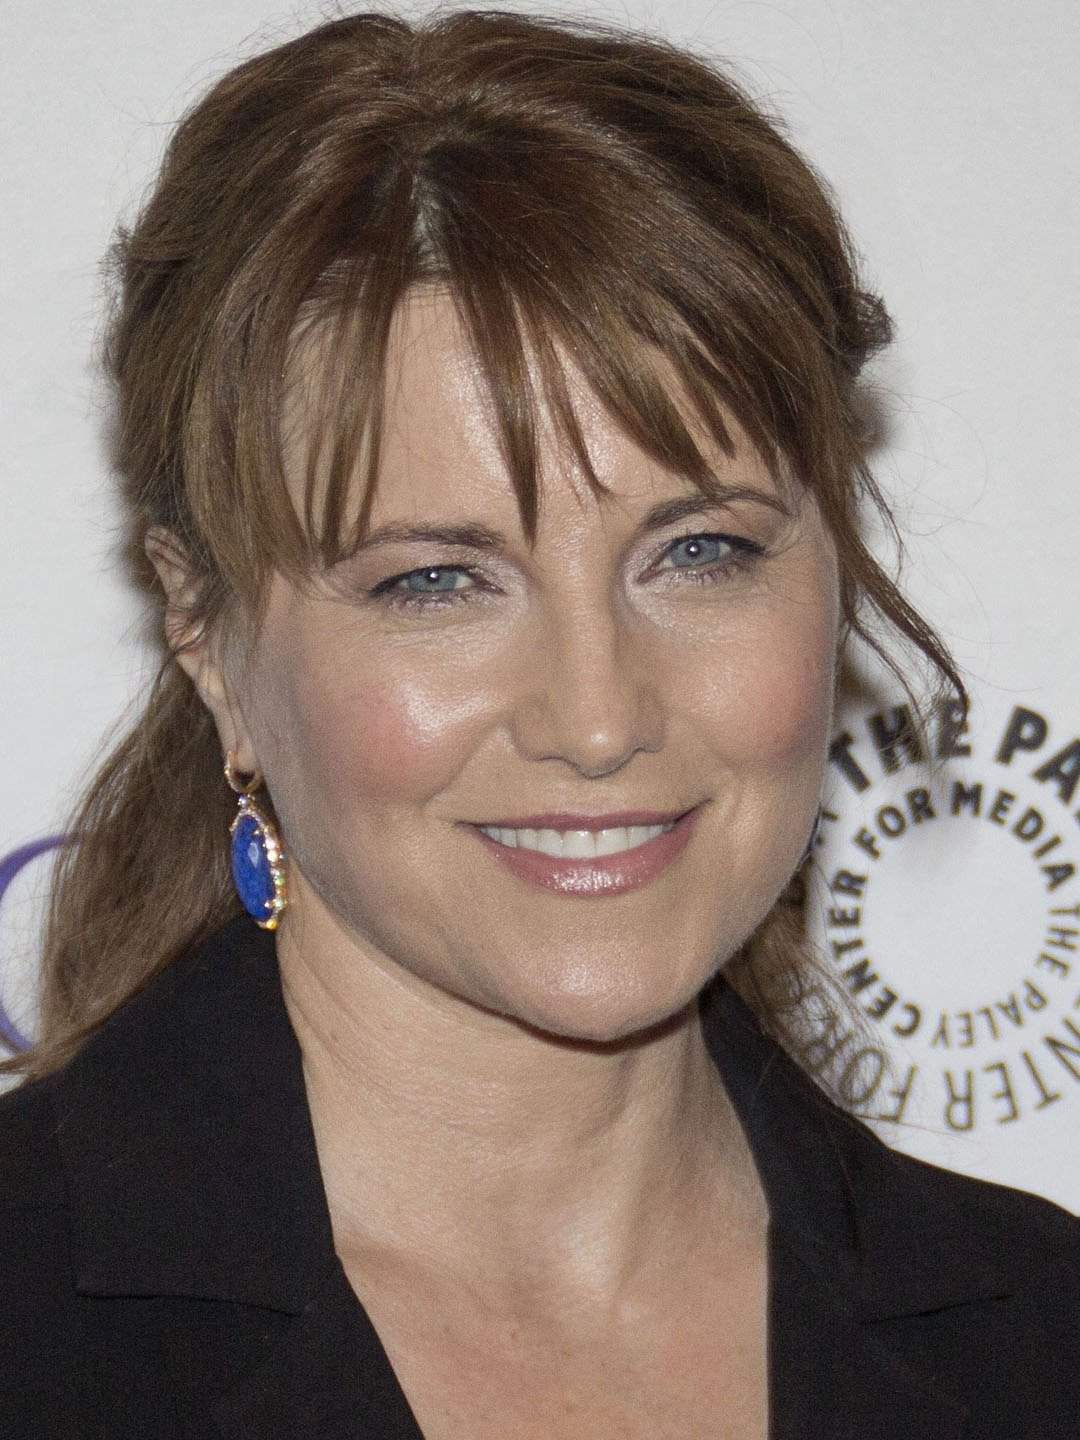 How tall is Lucy Lawless?